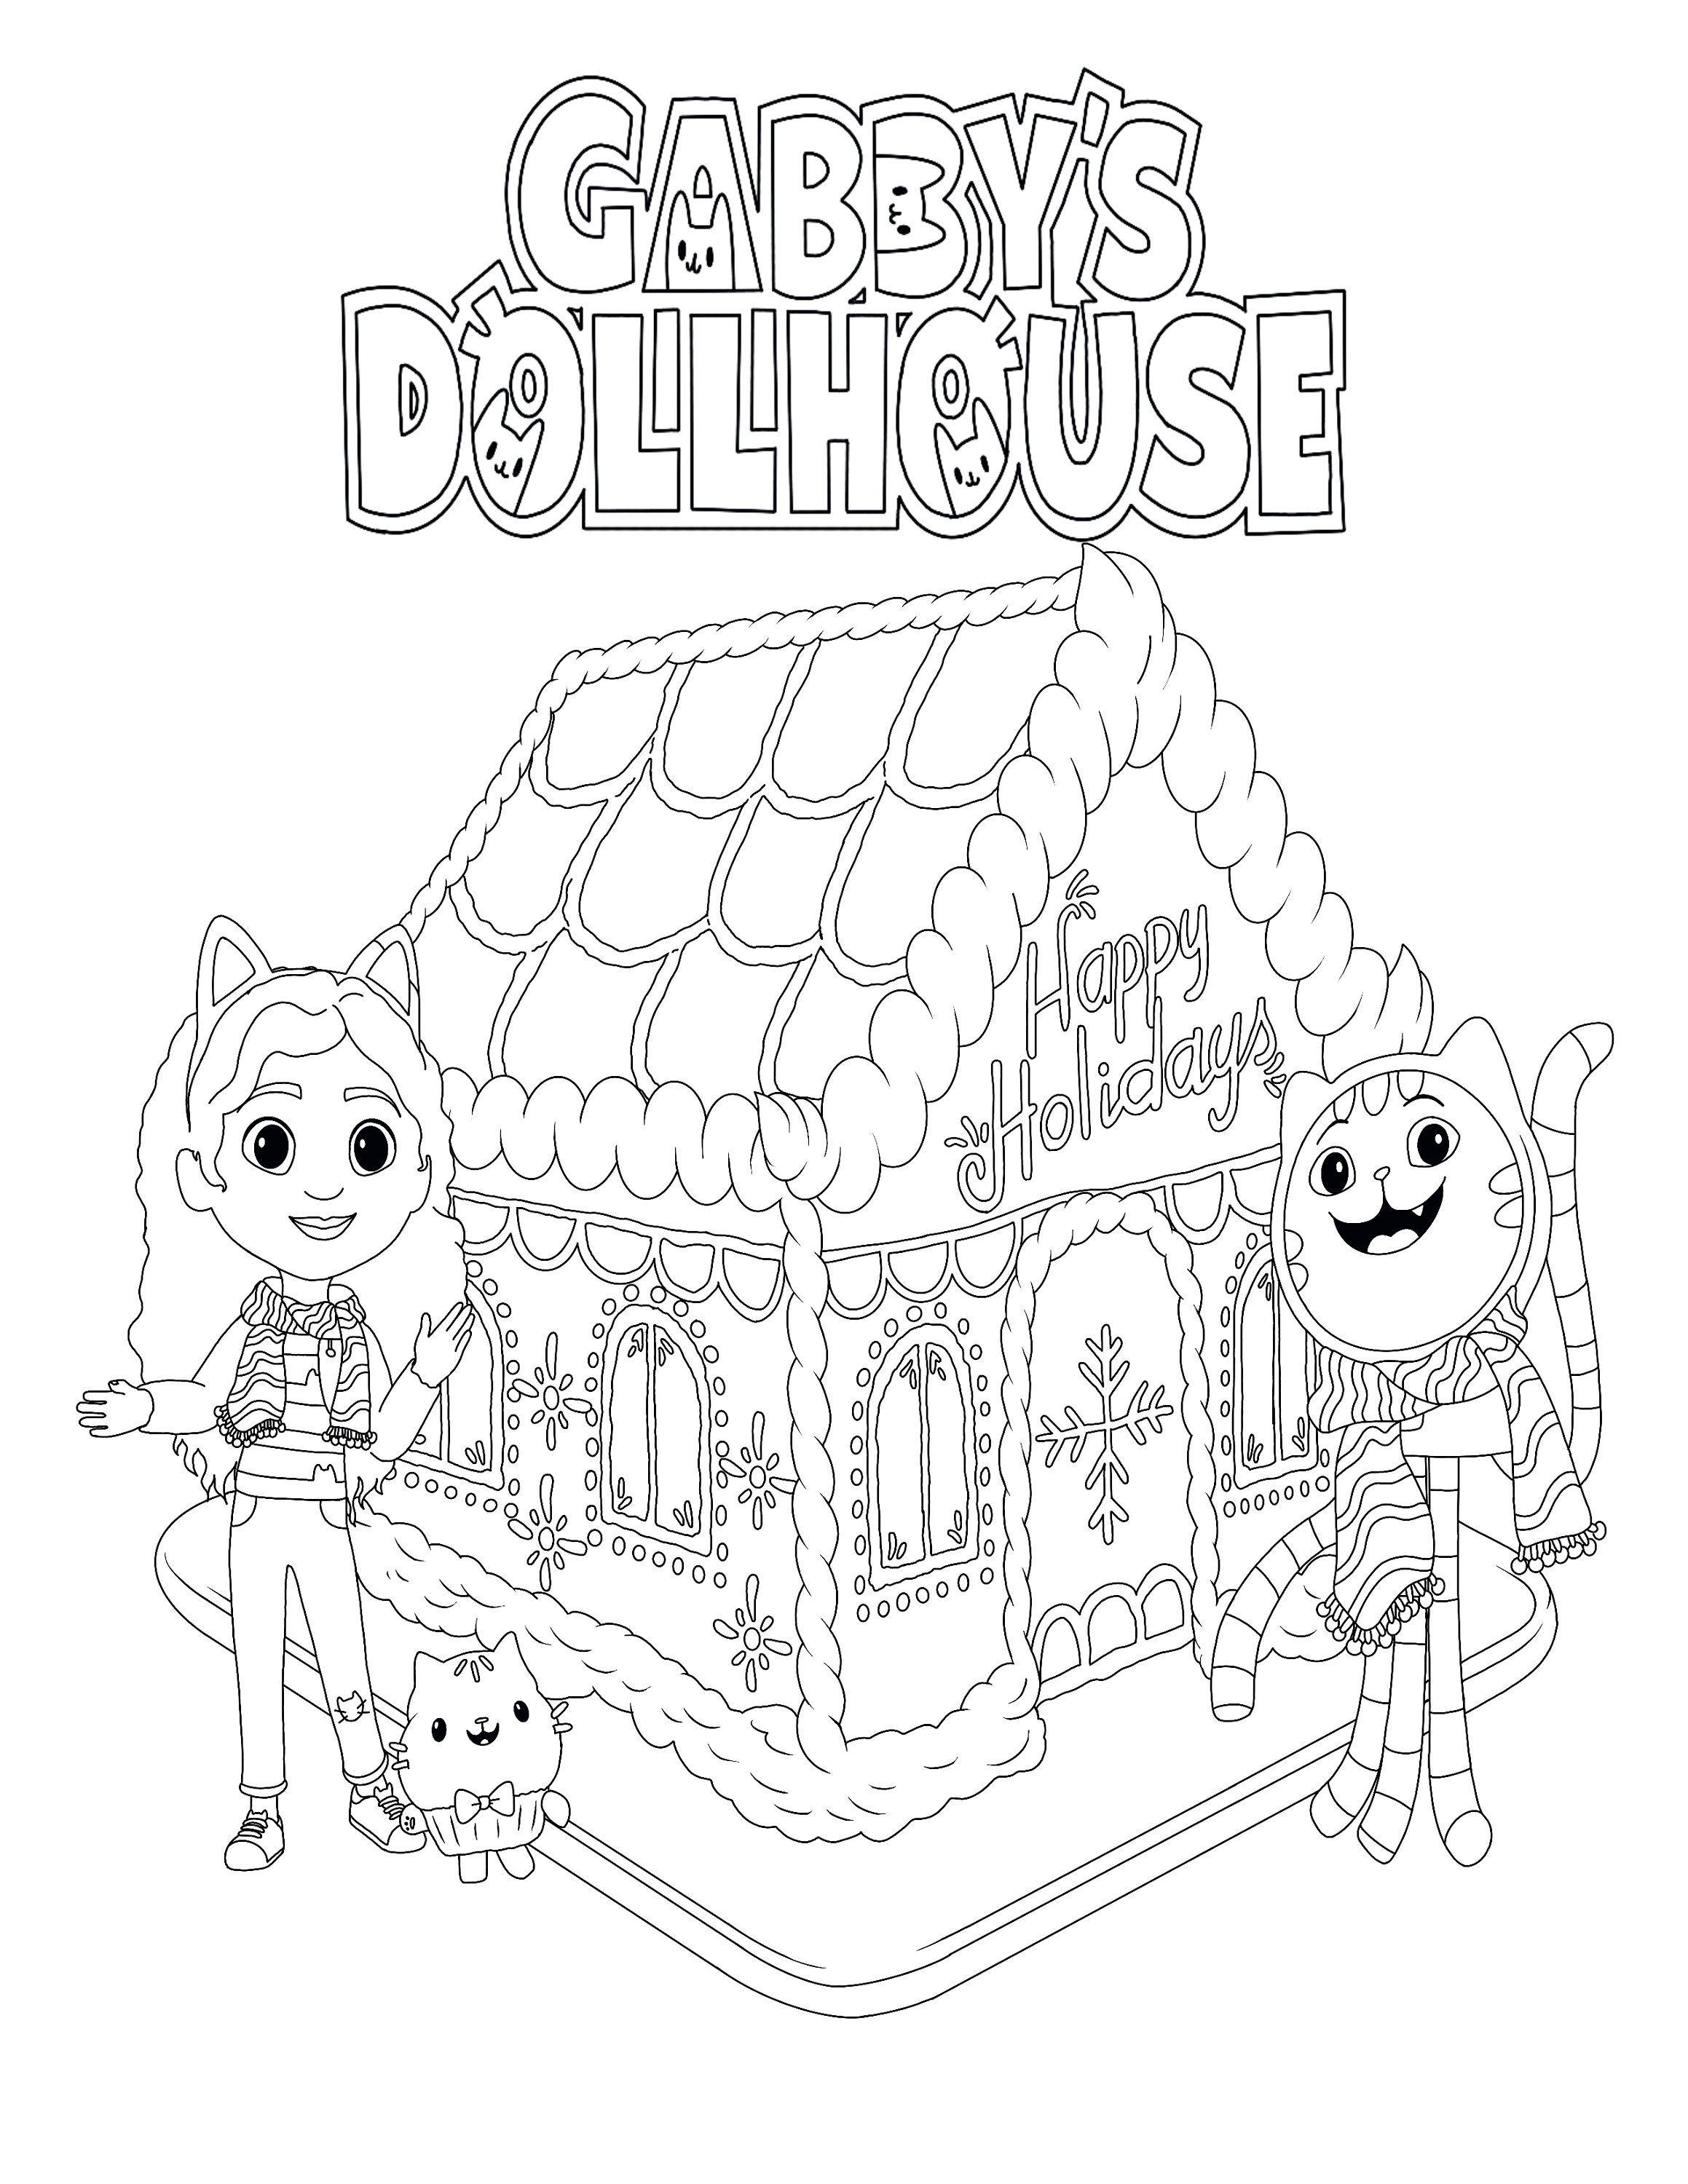 Gabby's Dollhouse Coloring Pages Coloring Home